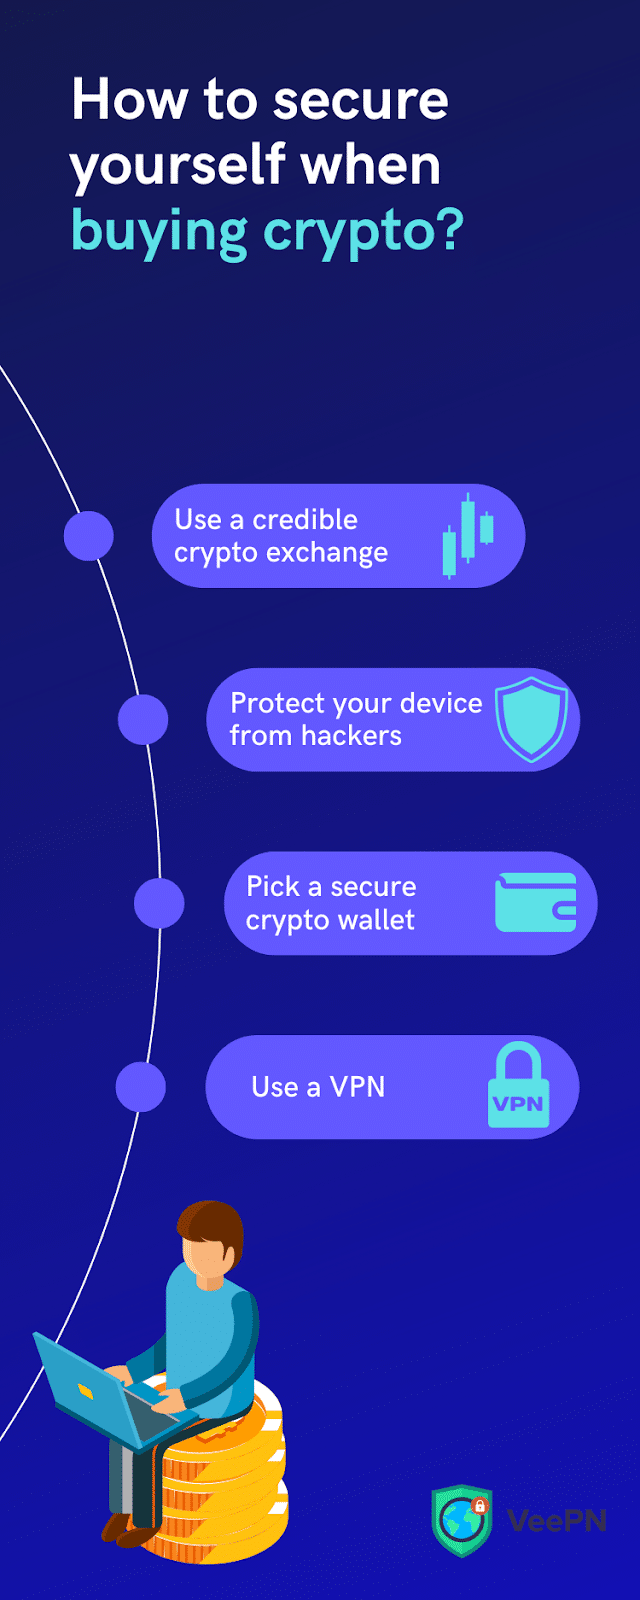 How to secure yourself when buying crypto?